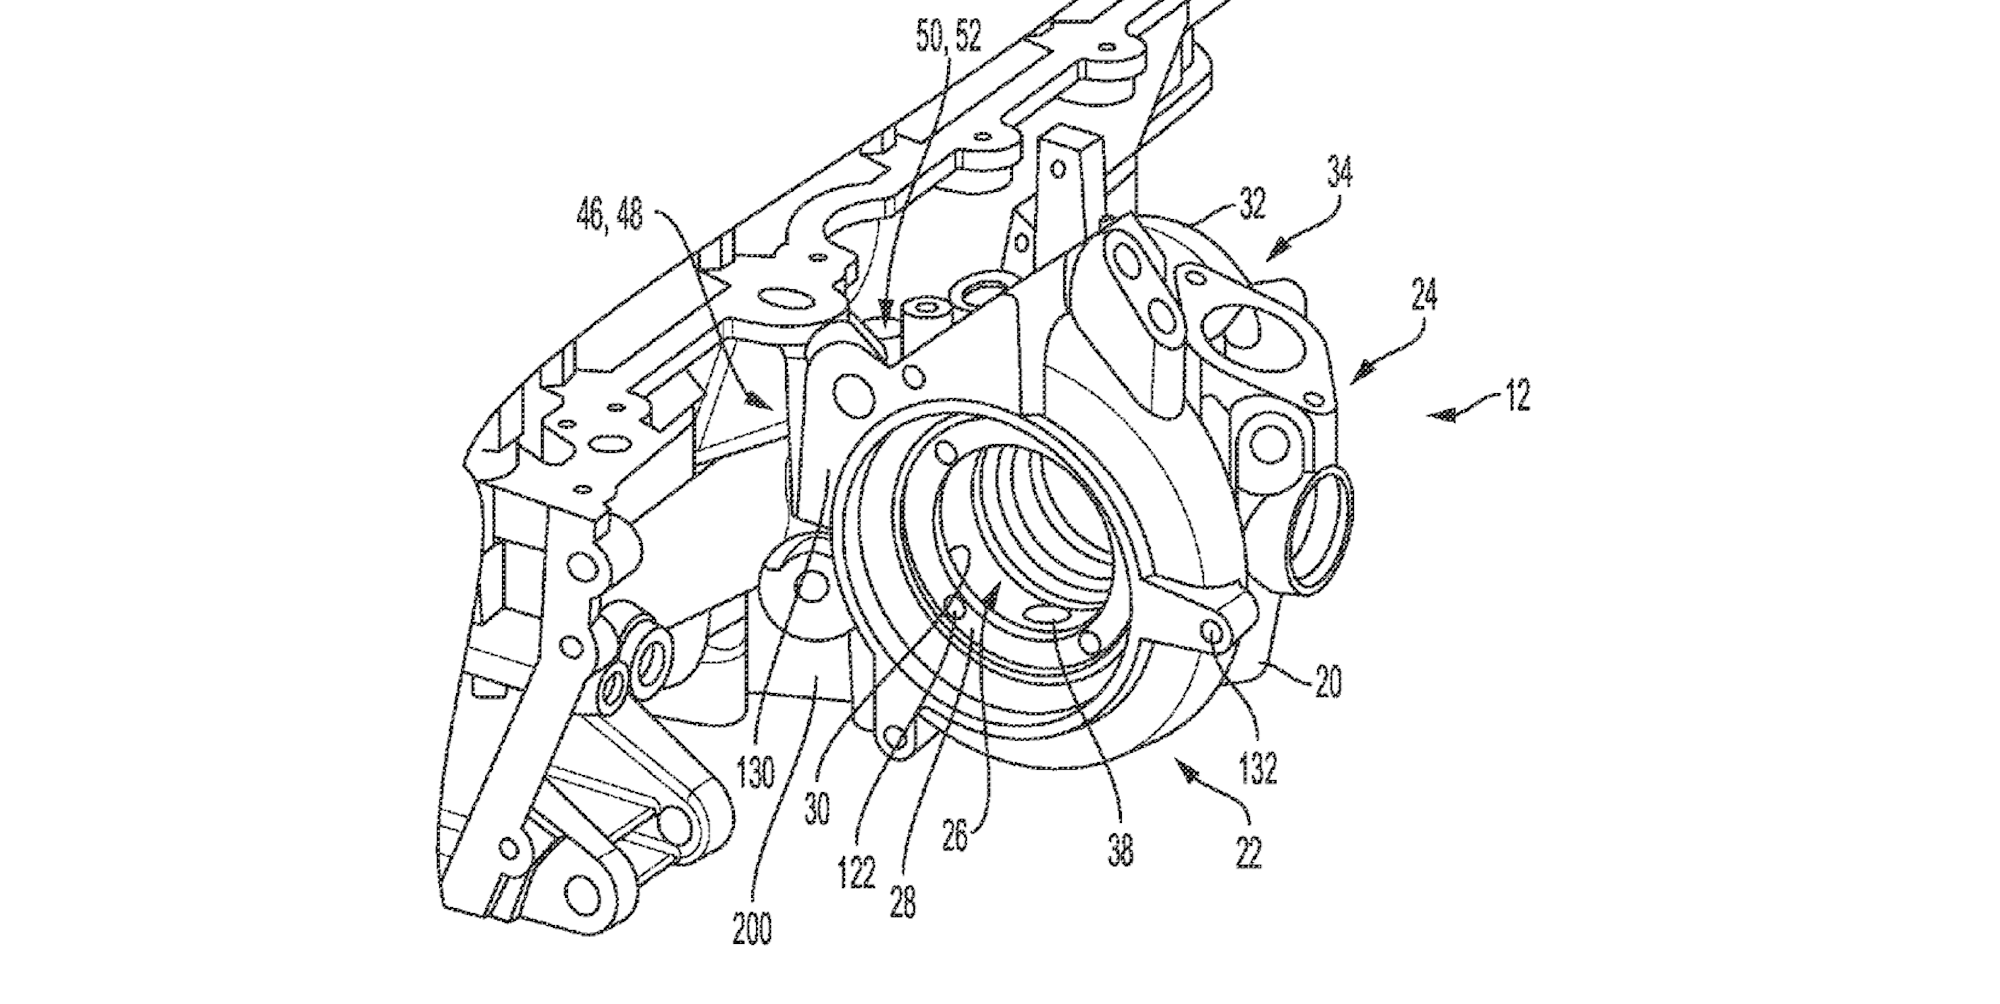 FCA Patent Combines Turbo and Cylinder Head Into One Piece